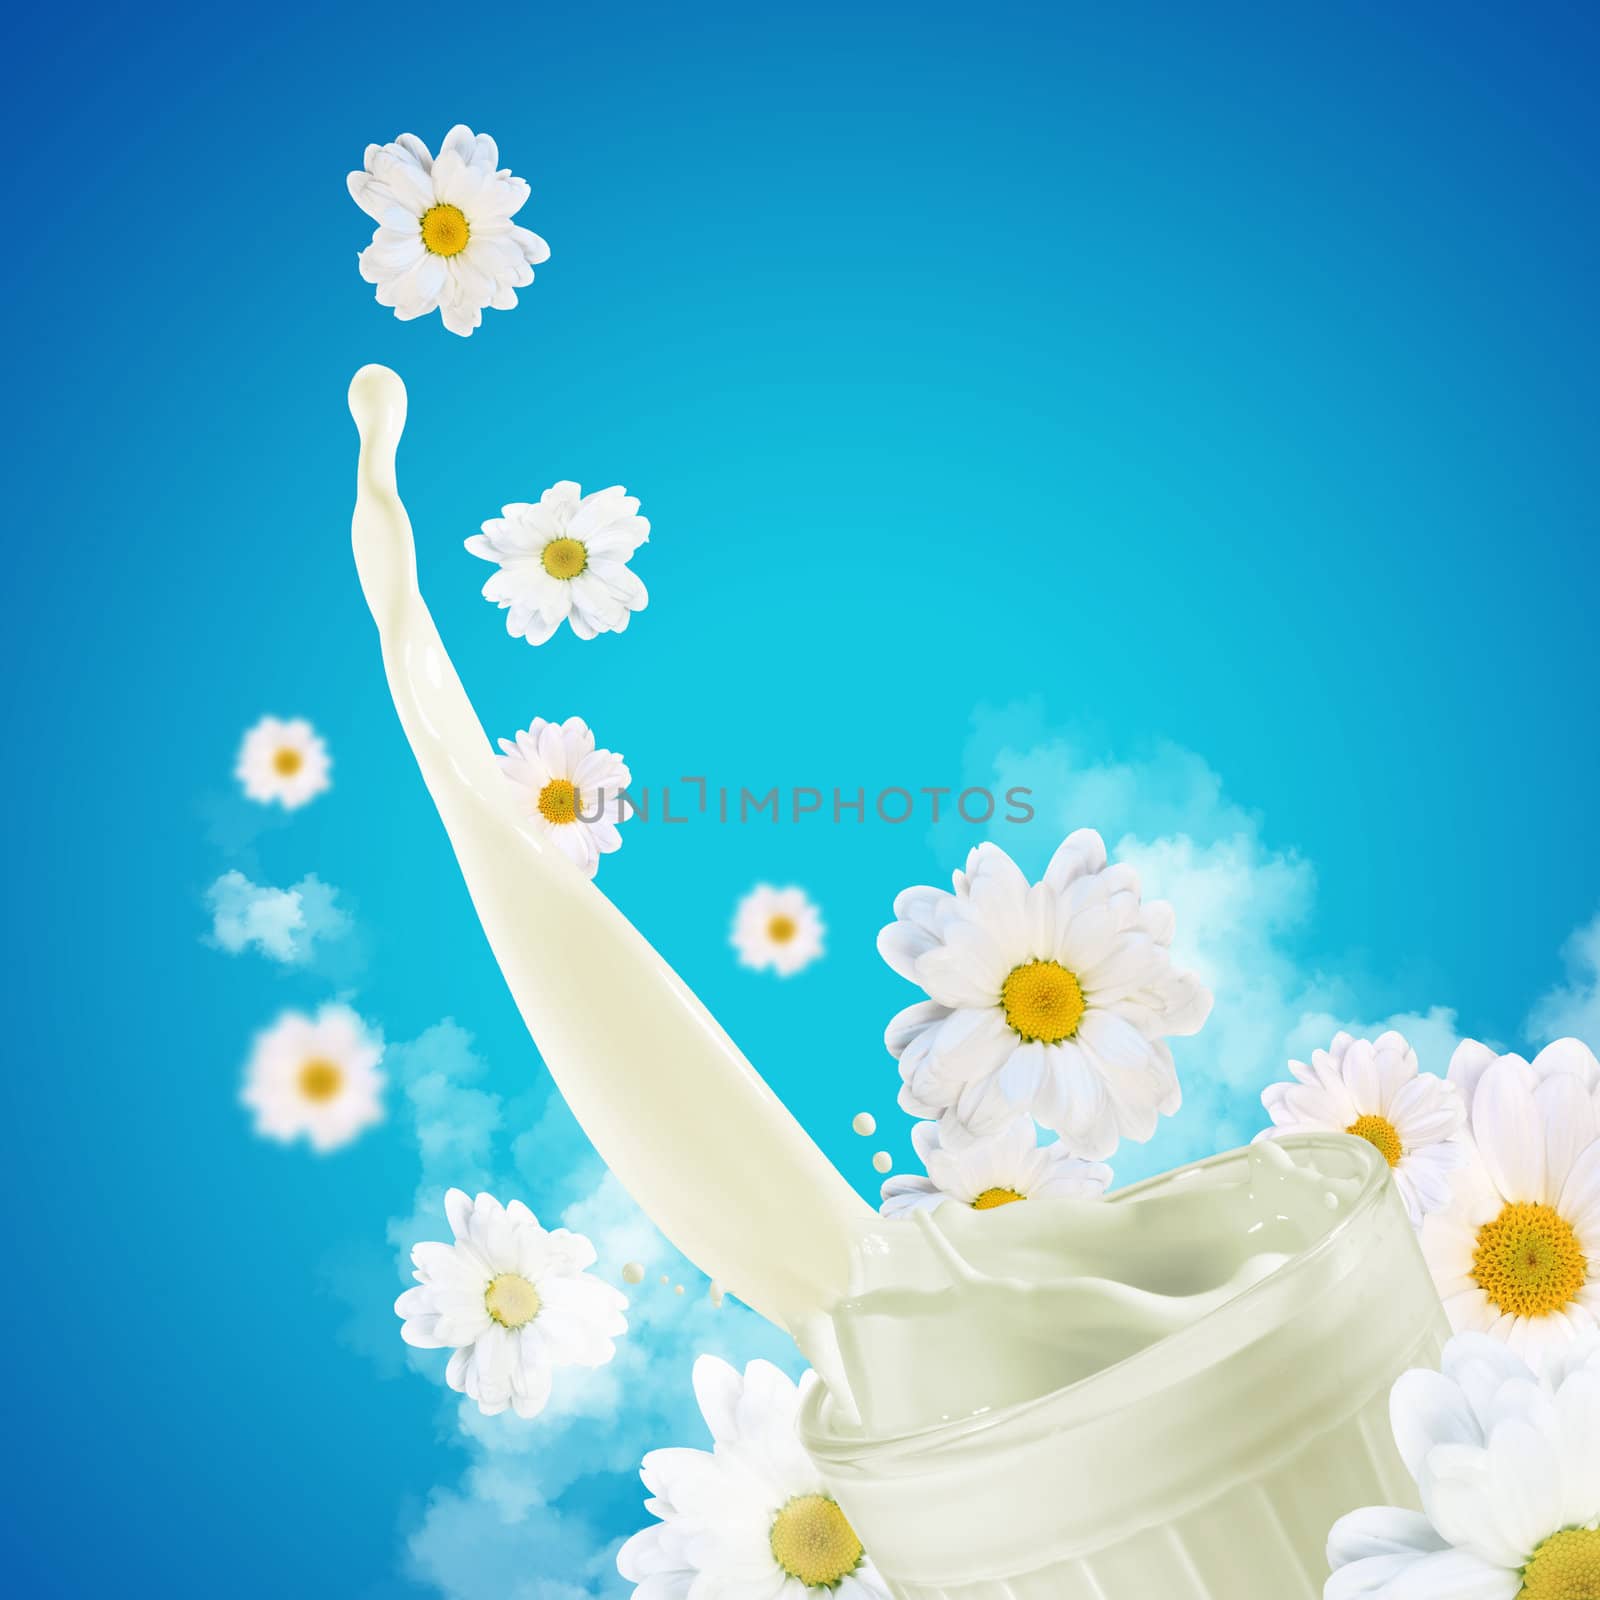 Fresh milk in the glass on colour background, illustration